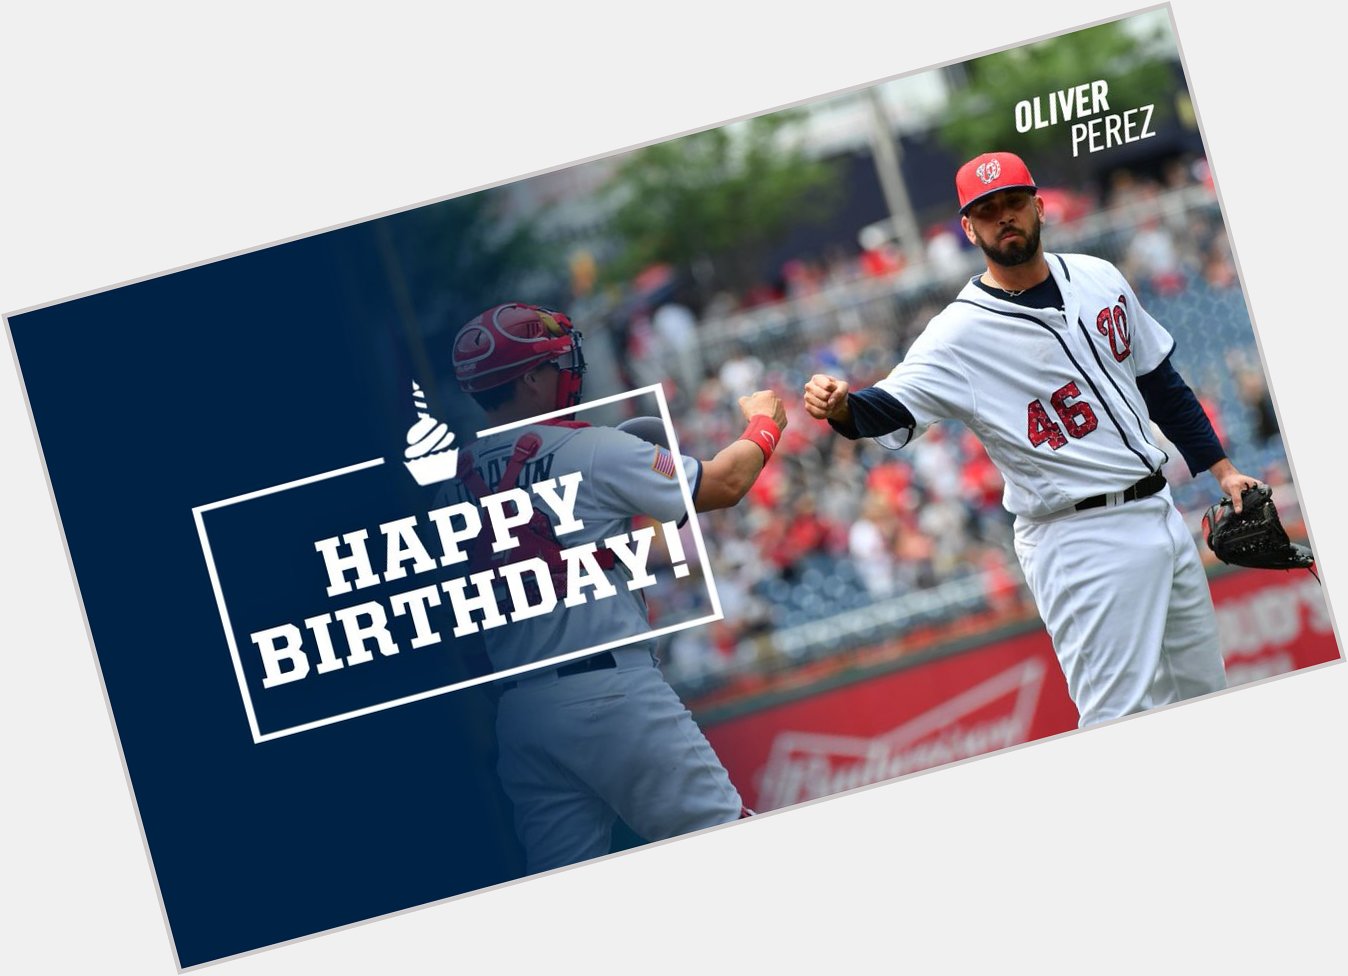 Join us in wishing Oliver Perez a very happy birthday! 